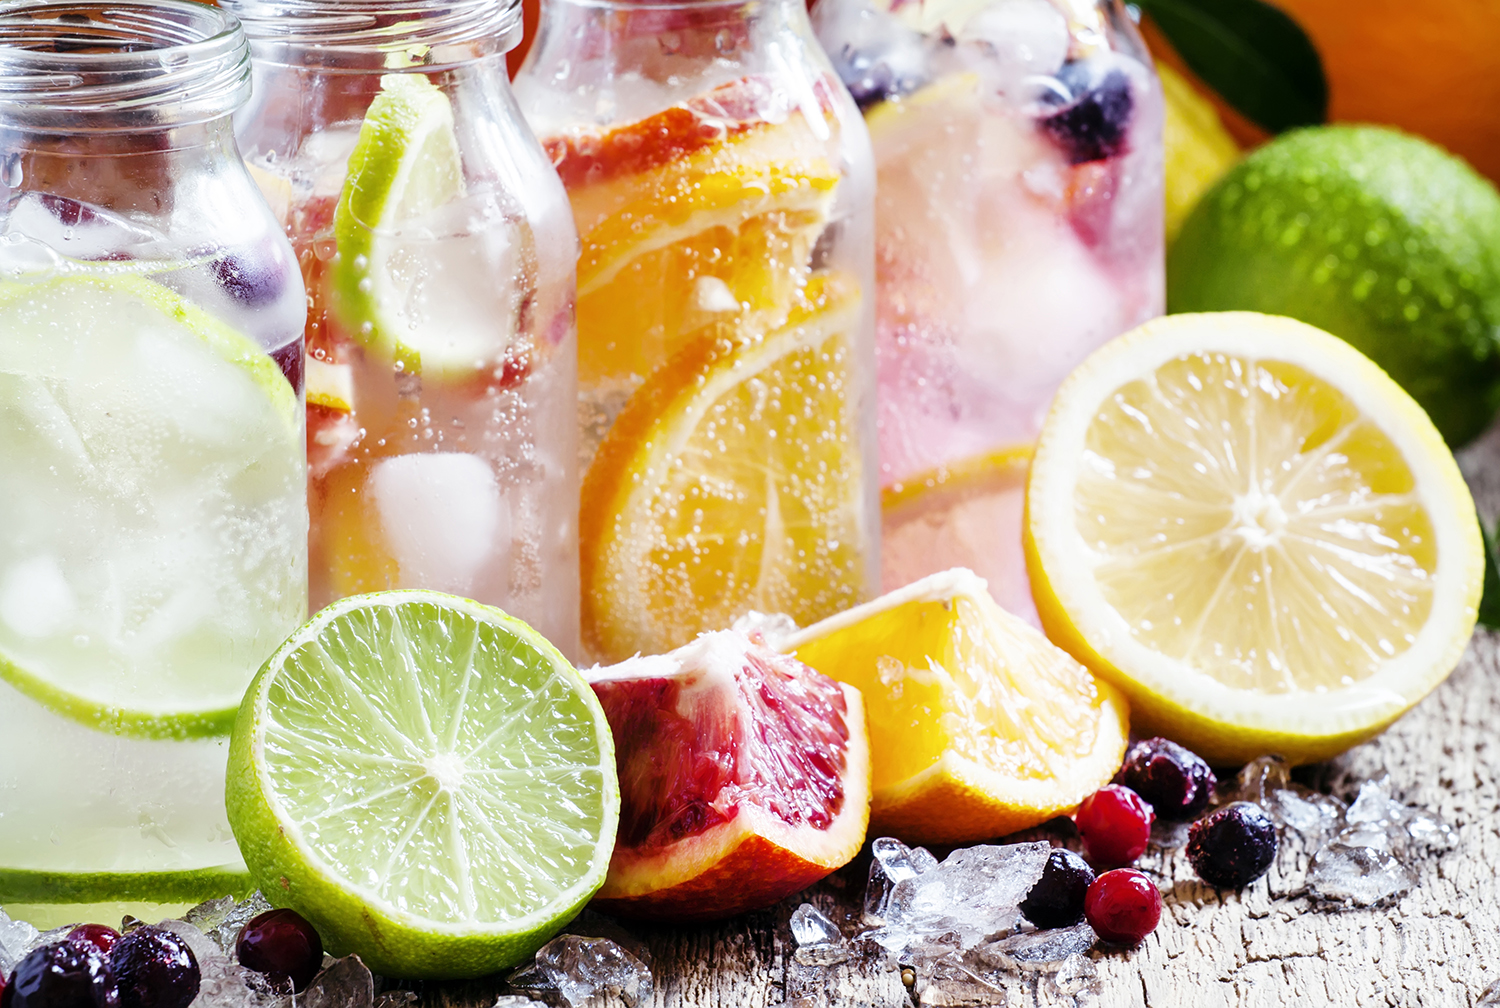 Fizzy water with citrus fruit, fresh berries and crushed ice, vintage wooden background, selective focus